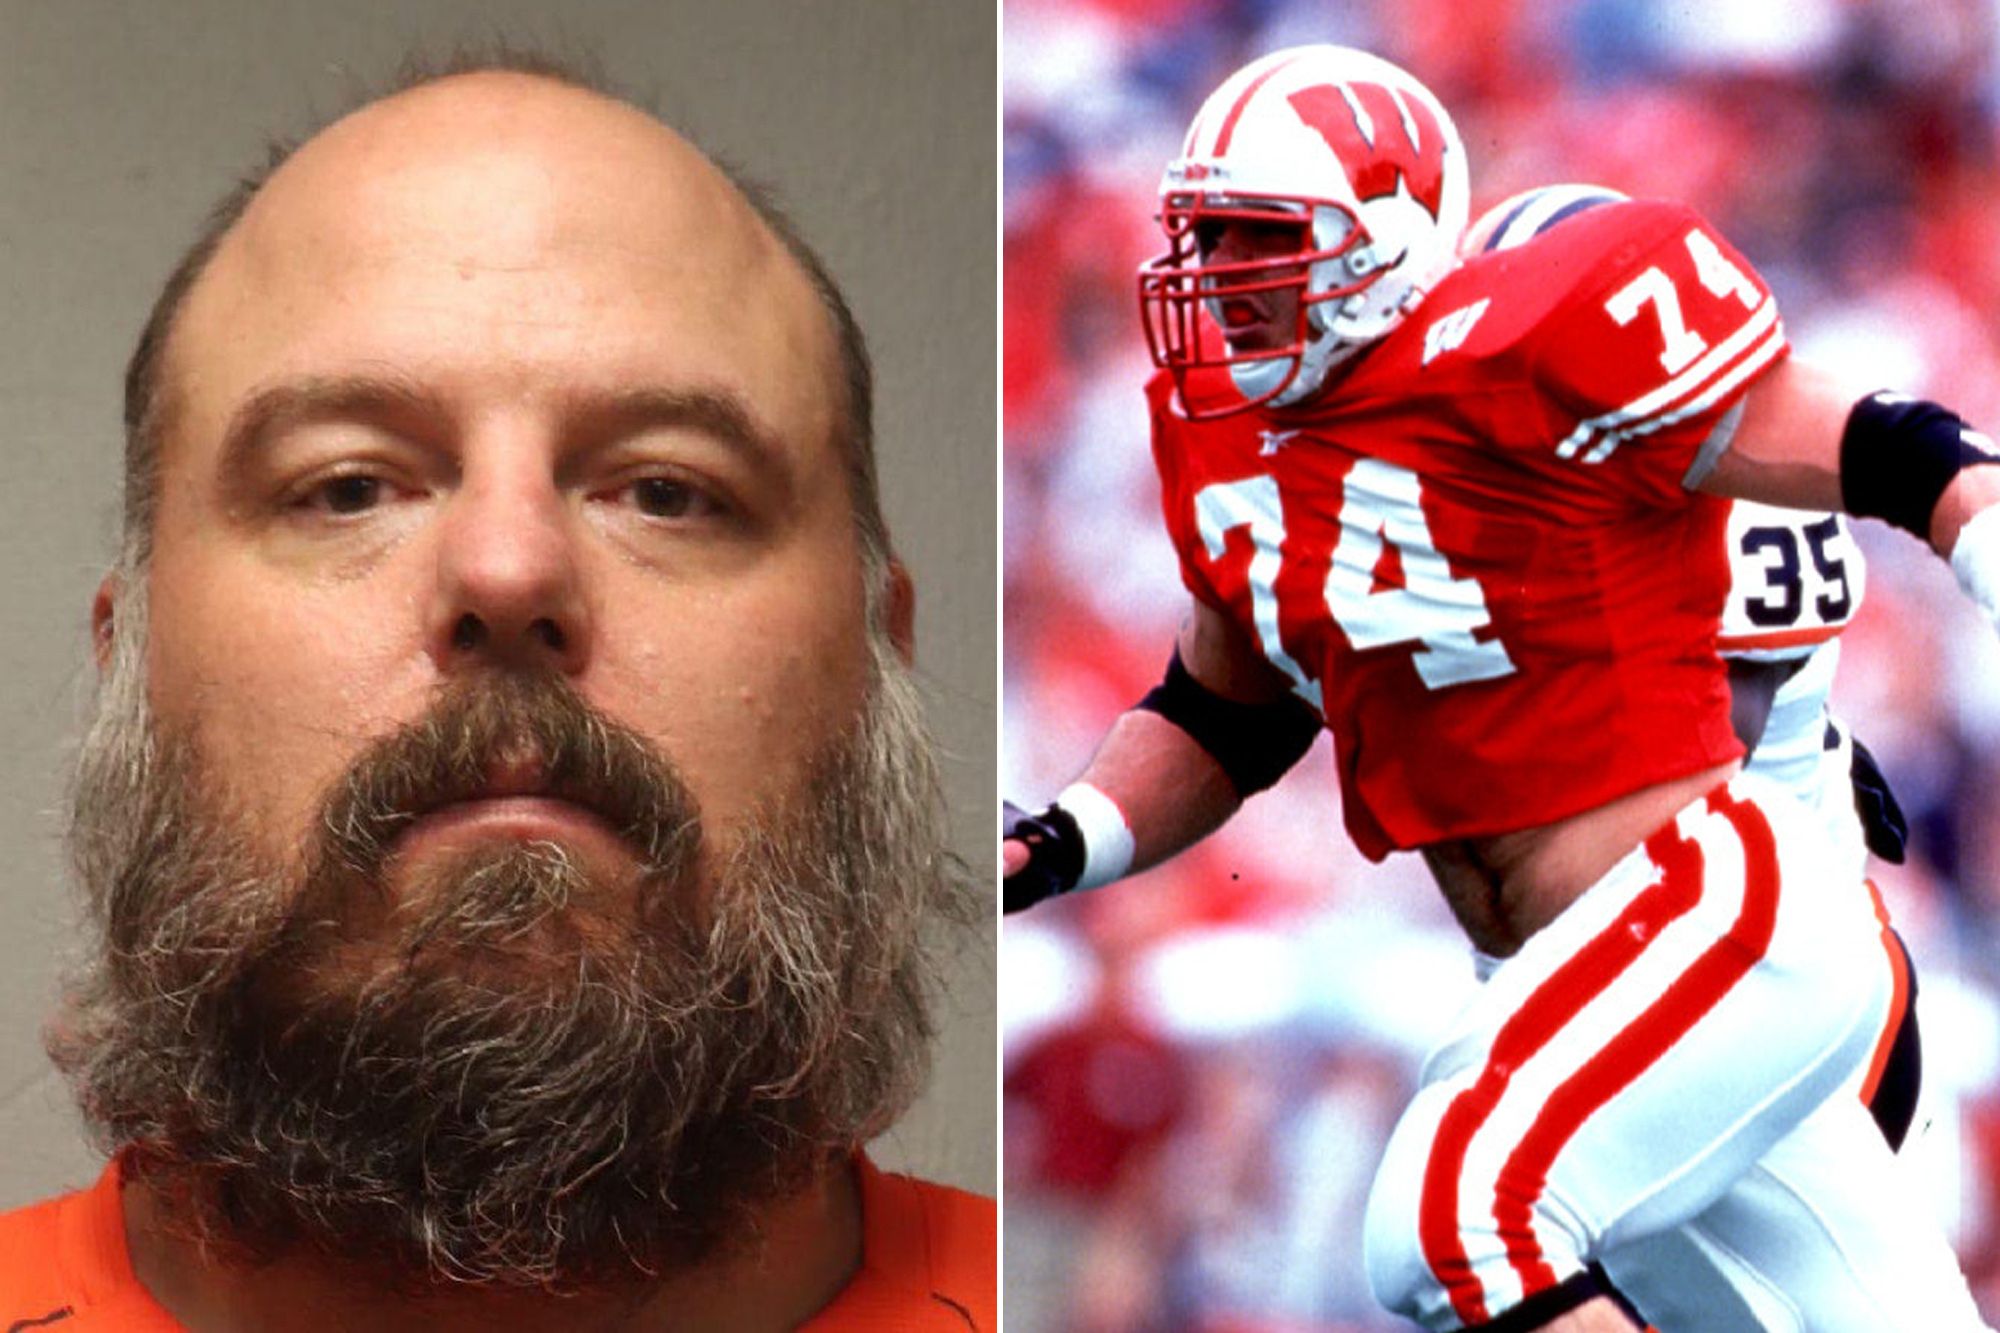 Former Bi Ten Defensive Lineman of the Year and Co-Defensive Player of the Year for Wisconsin pleads not guilty to sexual assault of a minor